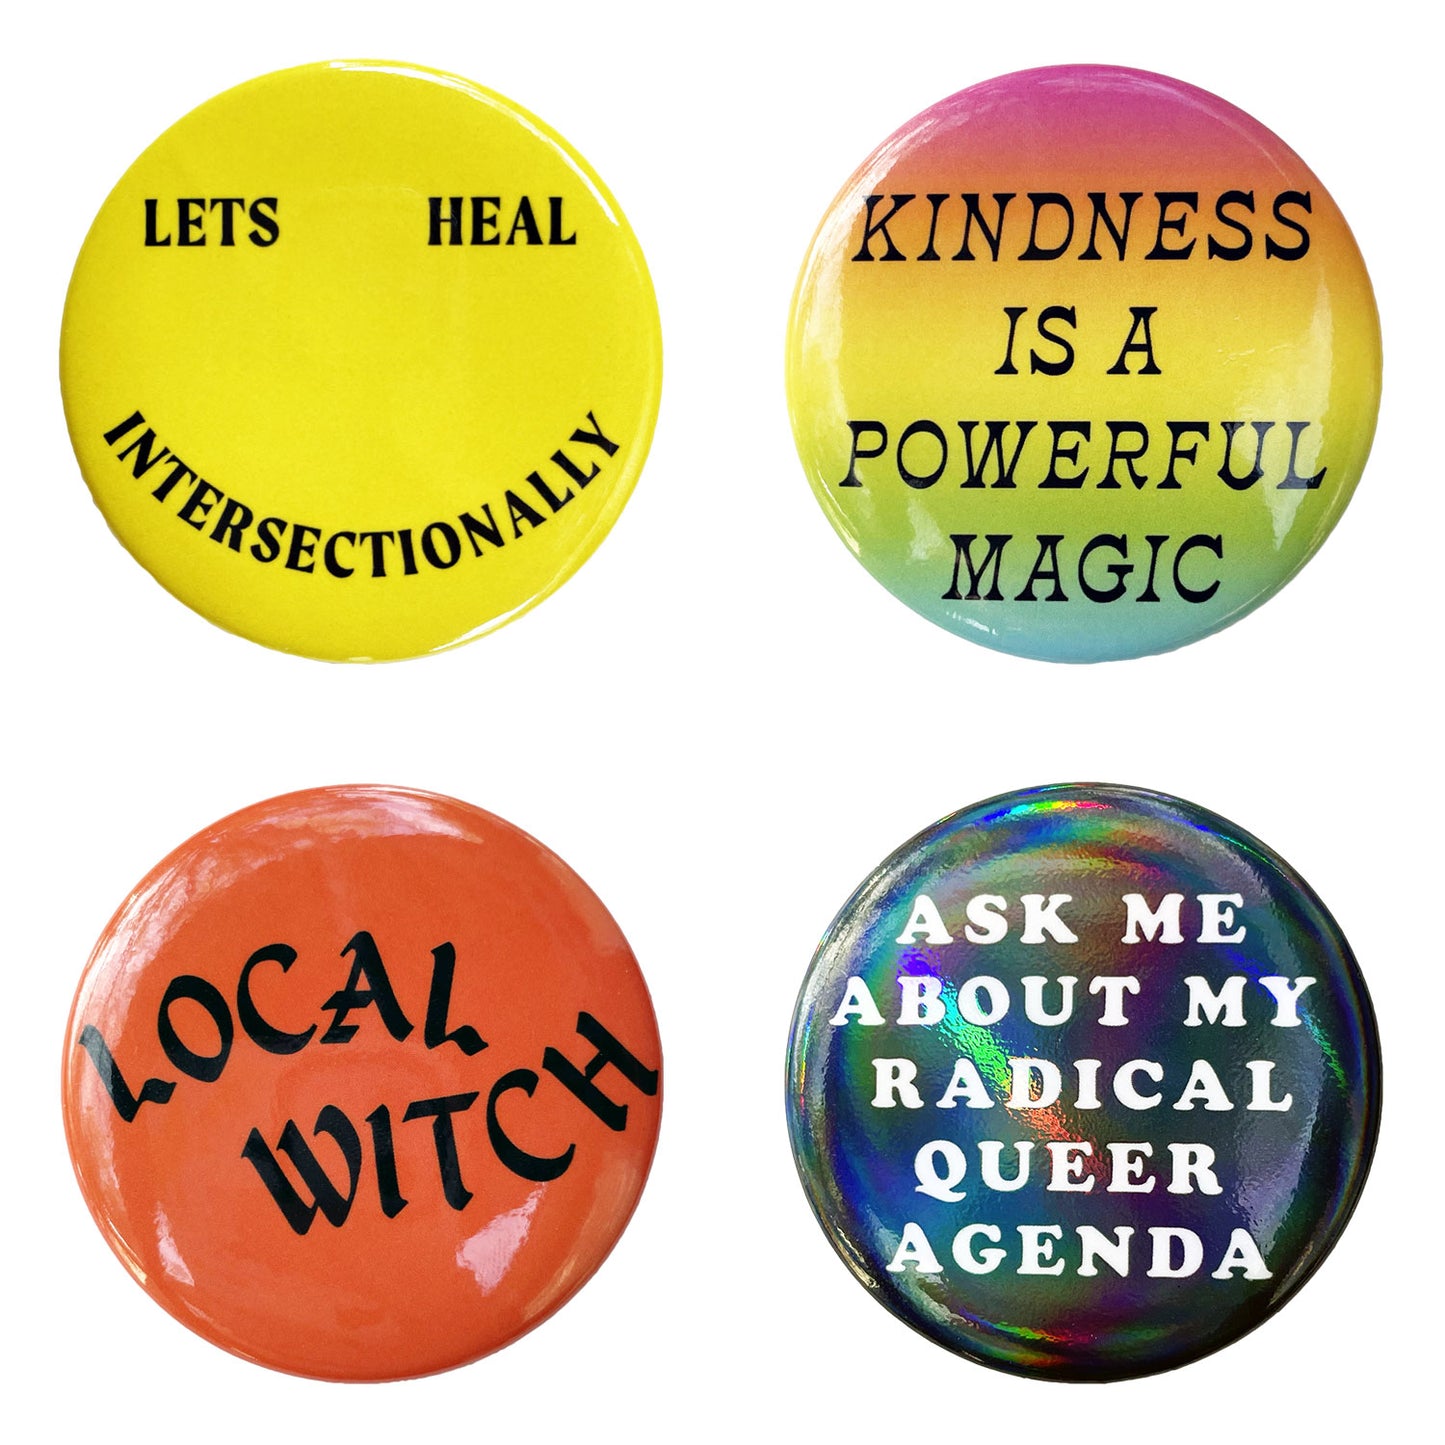 Lets Heal Intersectionally | 2.25" Big Smiley Button